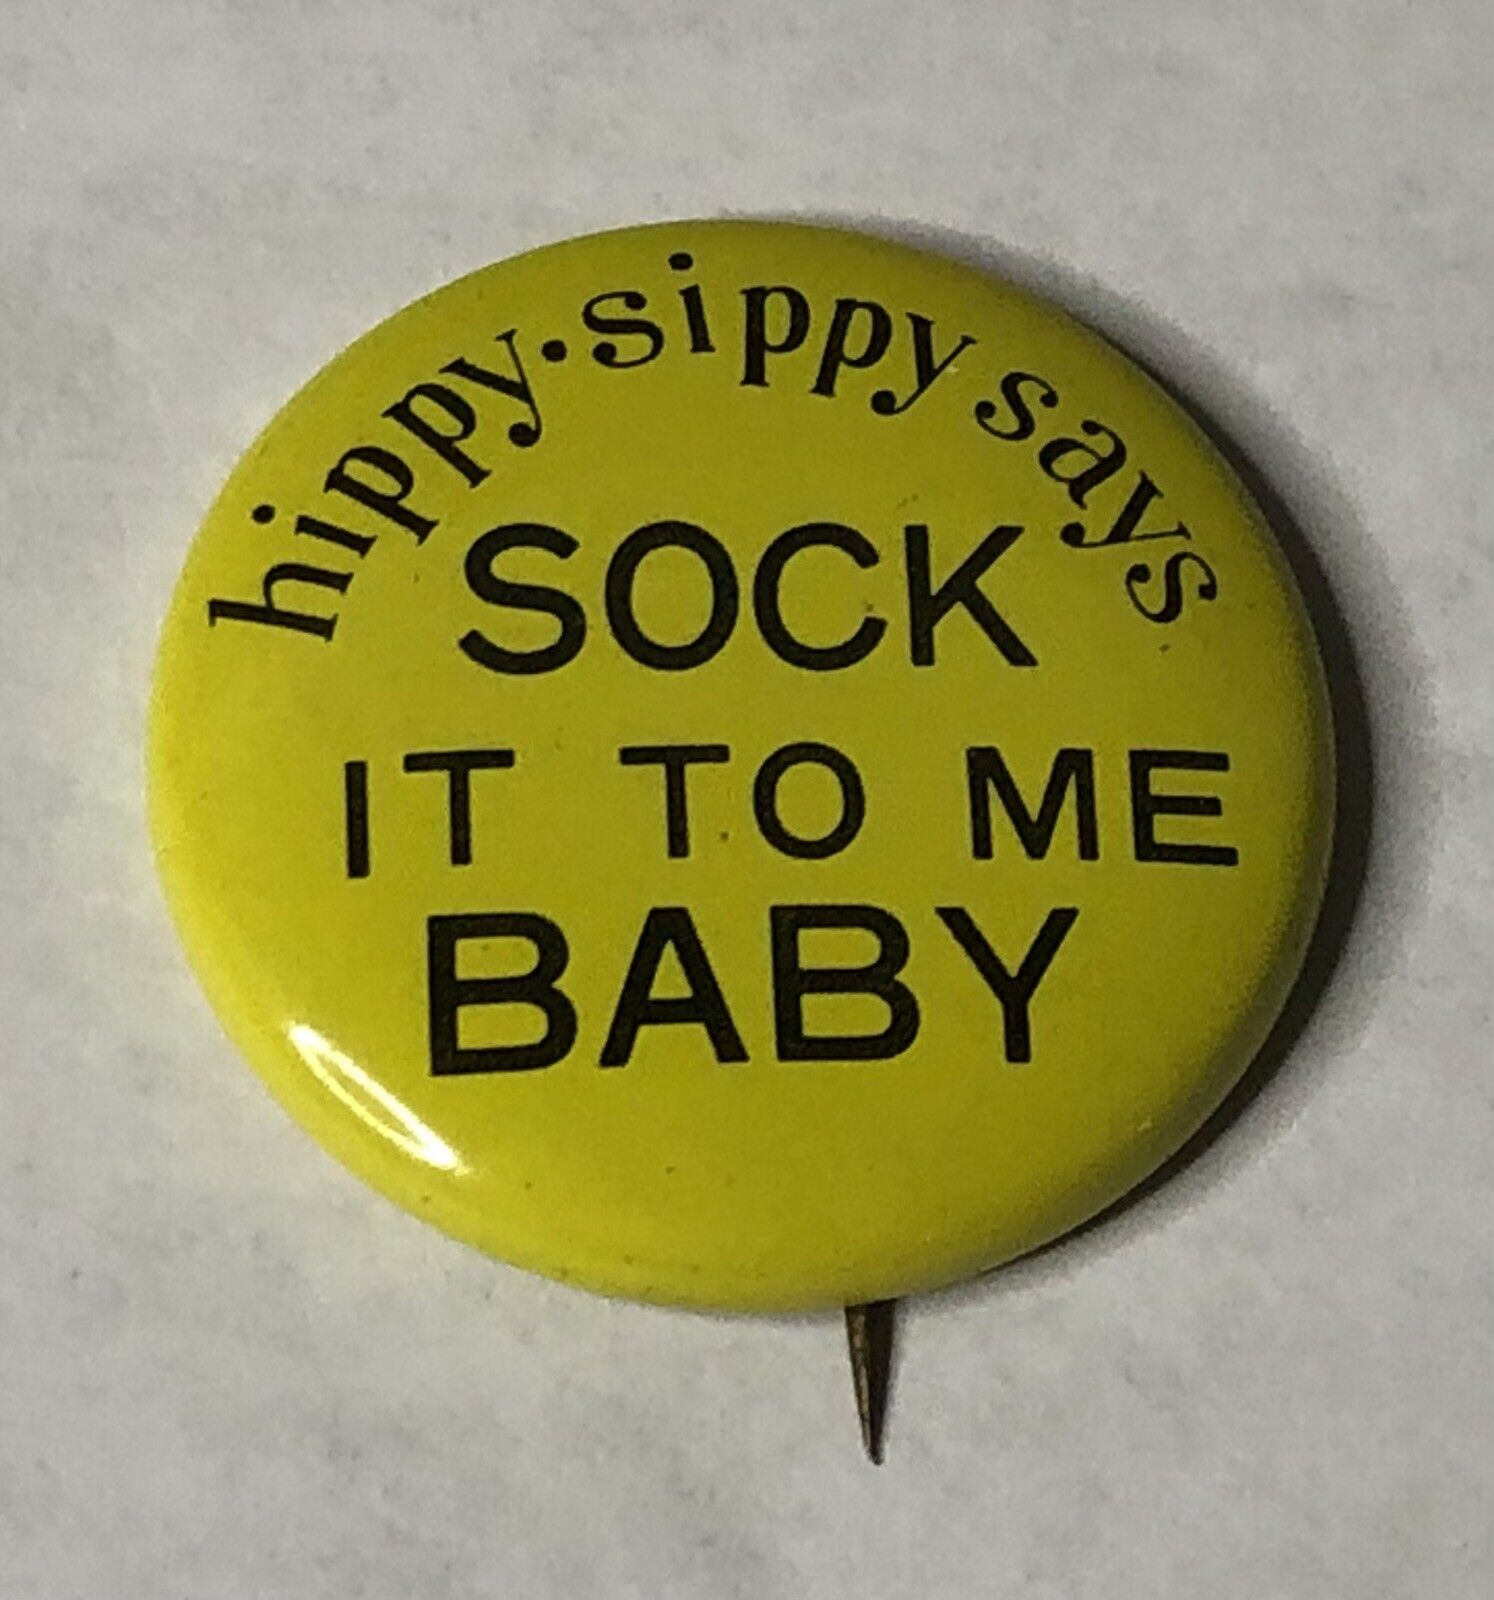 VINTAGE 1960’s HIPPY SIPPY SAYS SOCK IT TO ME BABY PIN BACK BUTTON YELLOW